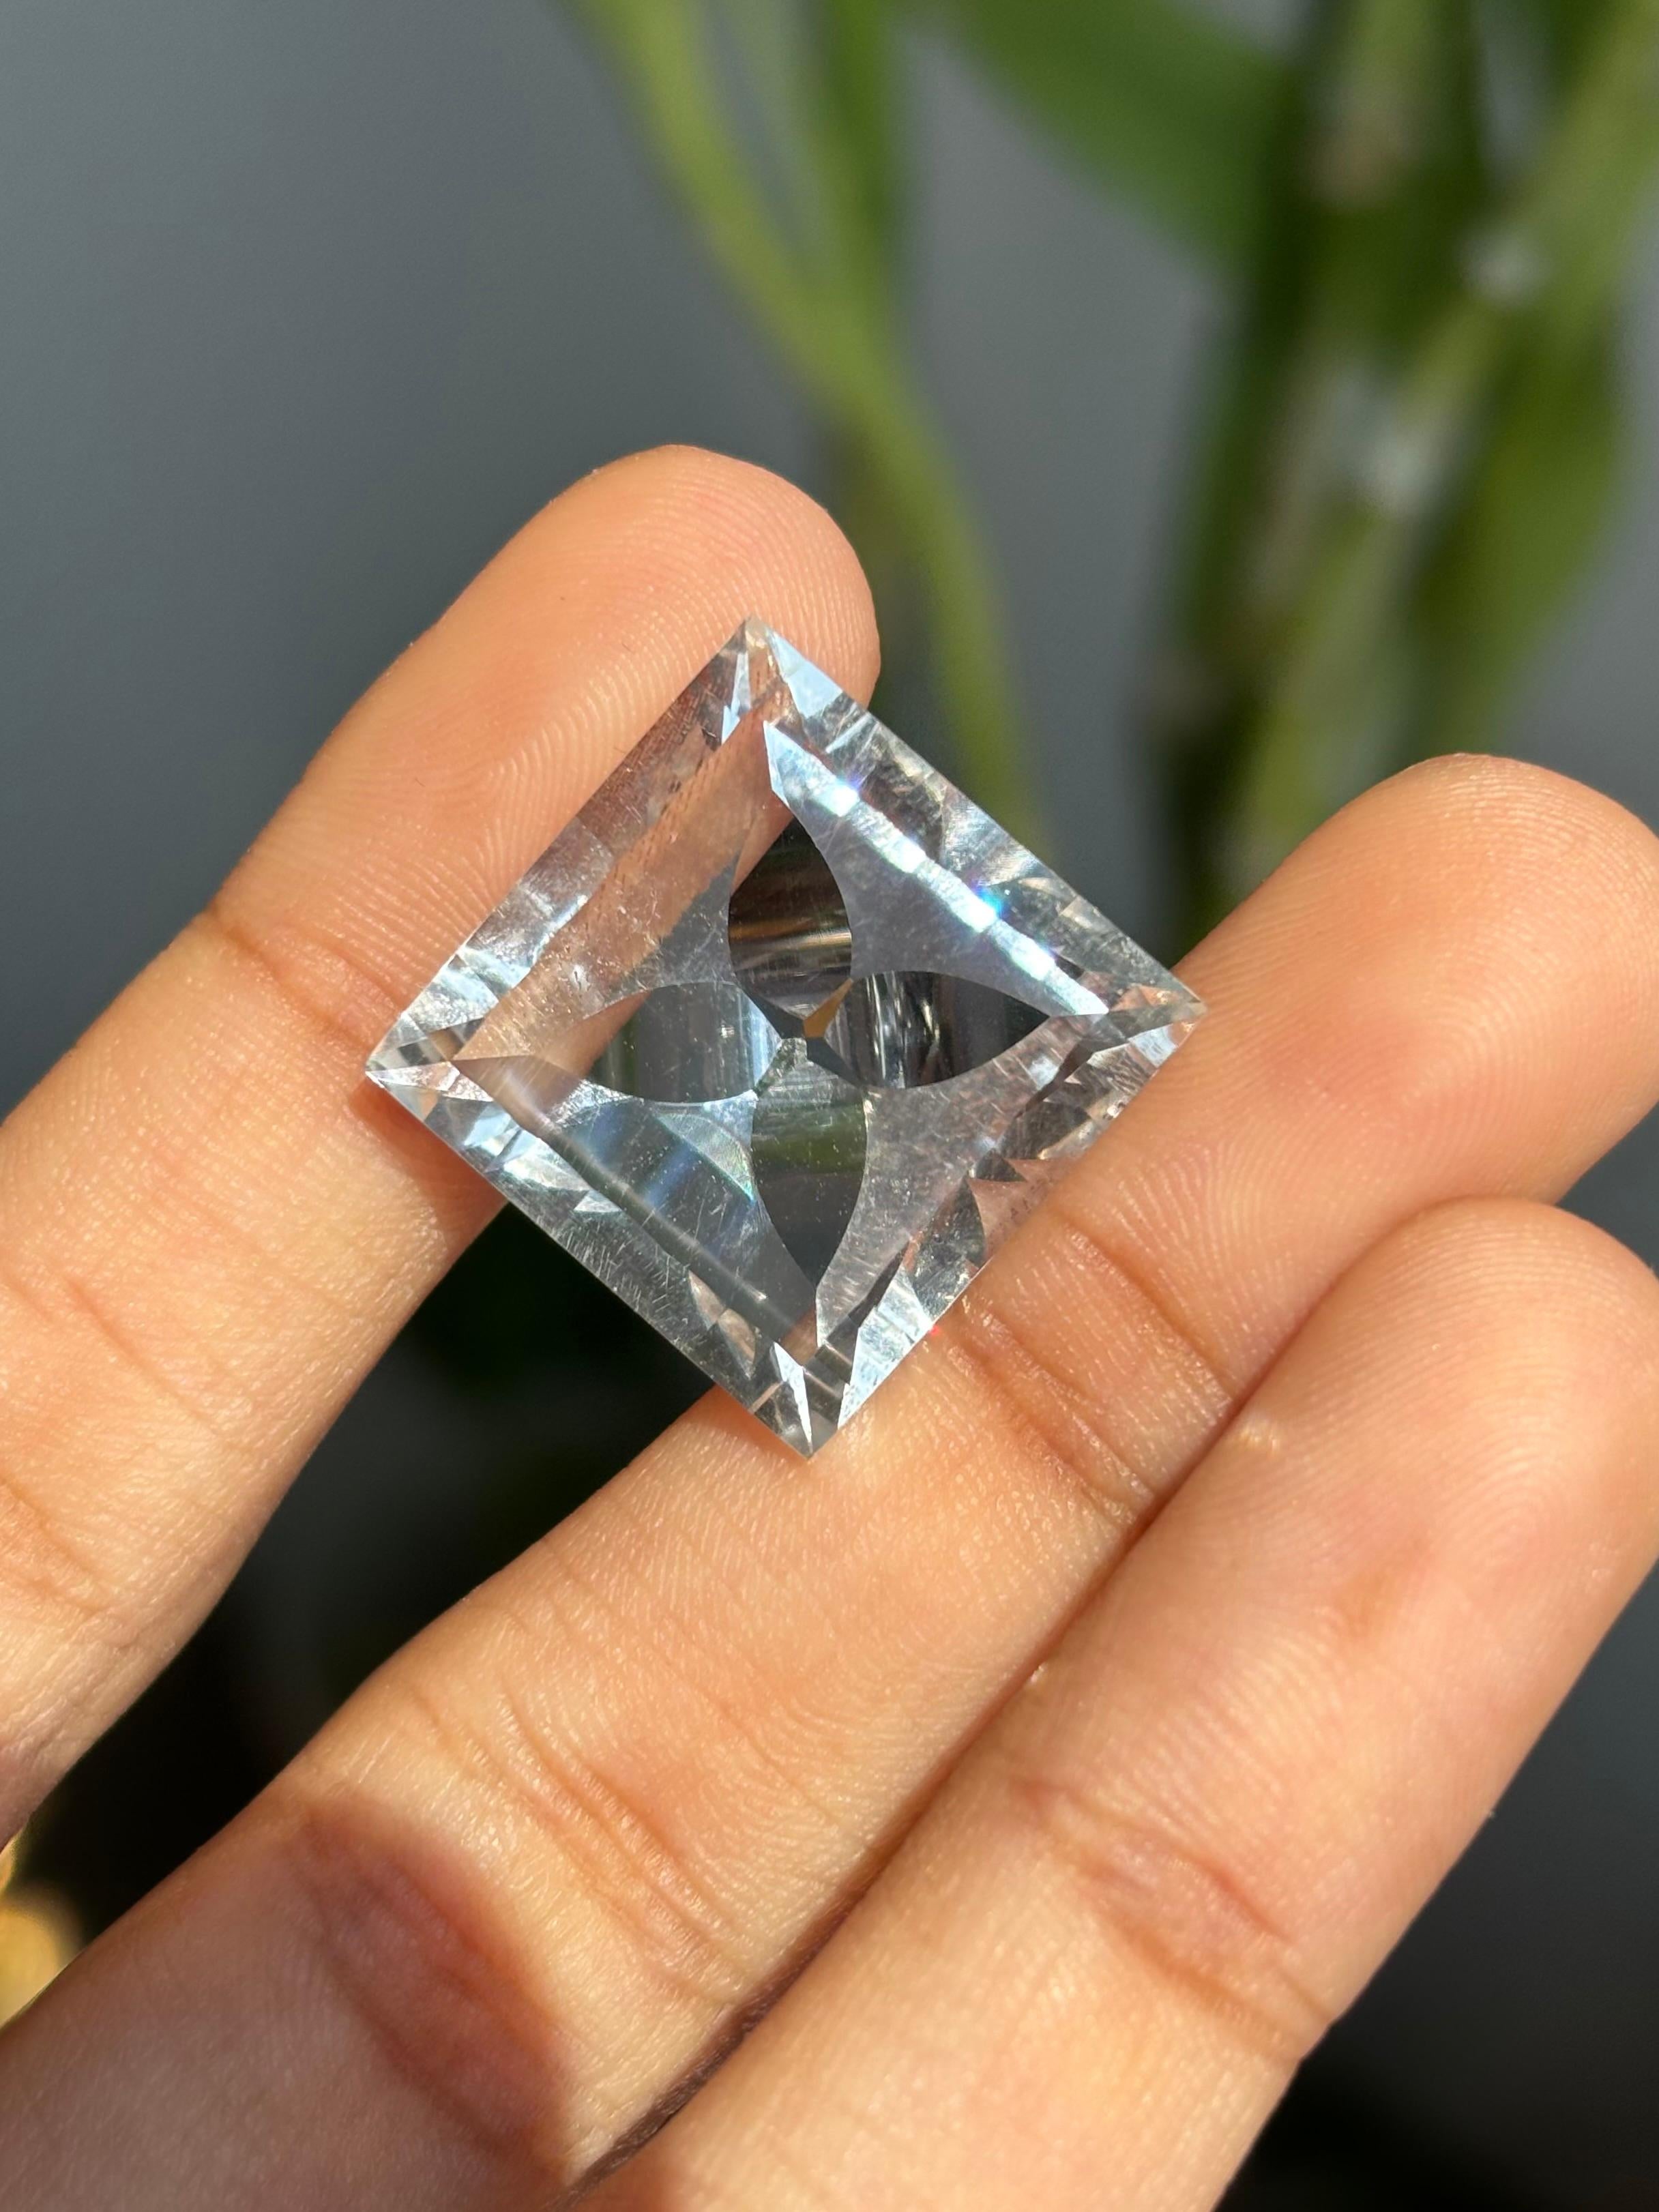 A stunning 23.03 Carat Topaz gemstone. It is completely natural and it is a clean stone.  The topaz stone is white in color. It is cut to perfection in a square shape, but the inside of the topaz resembles a flower-like shape, that is symmetrical